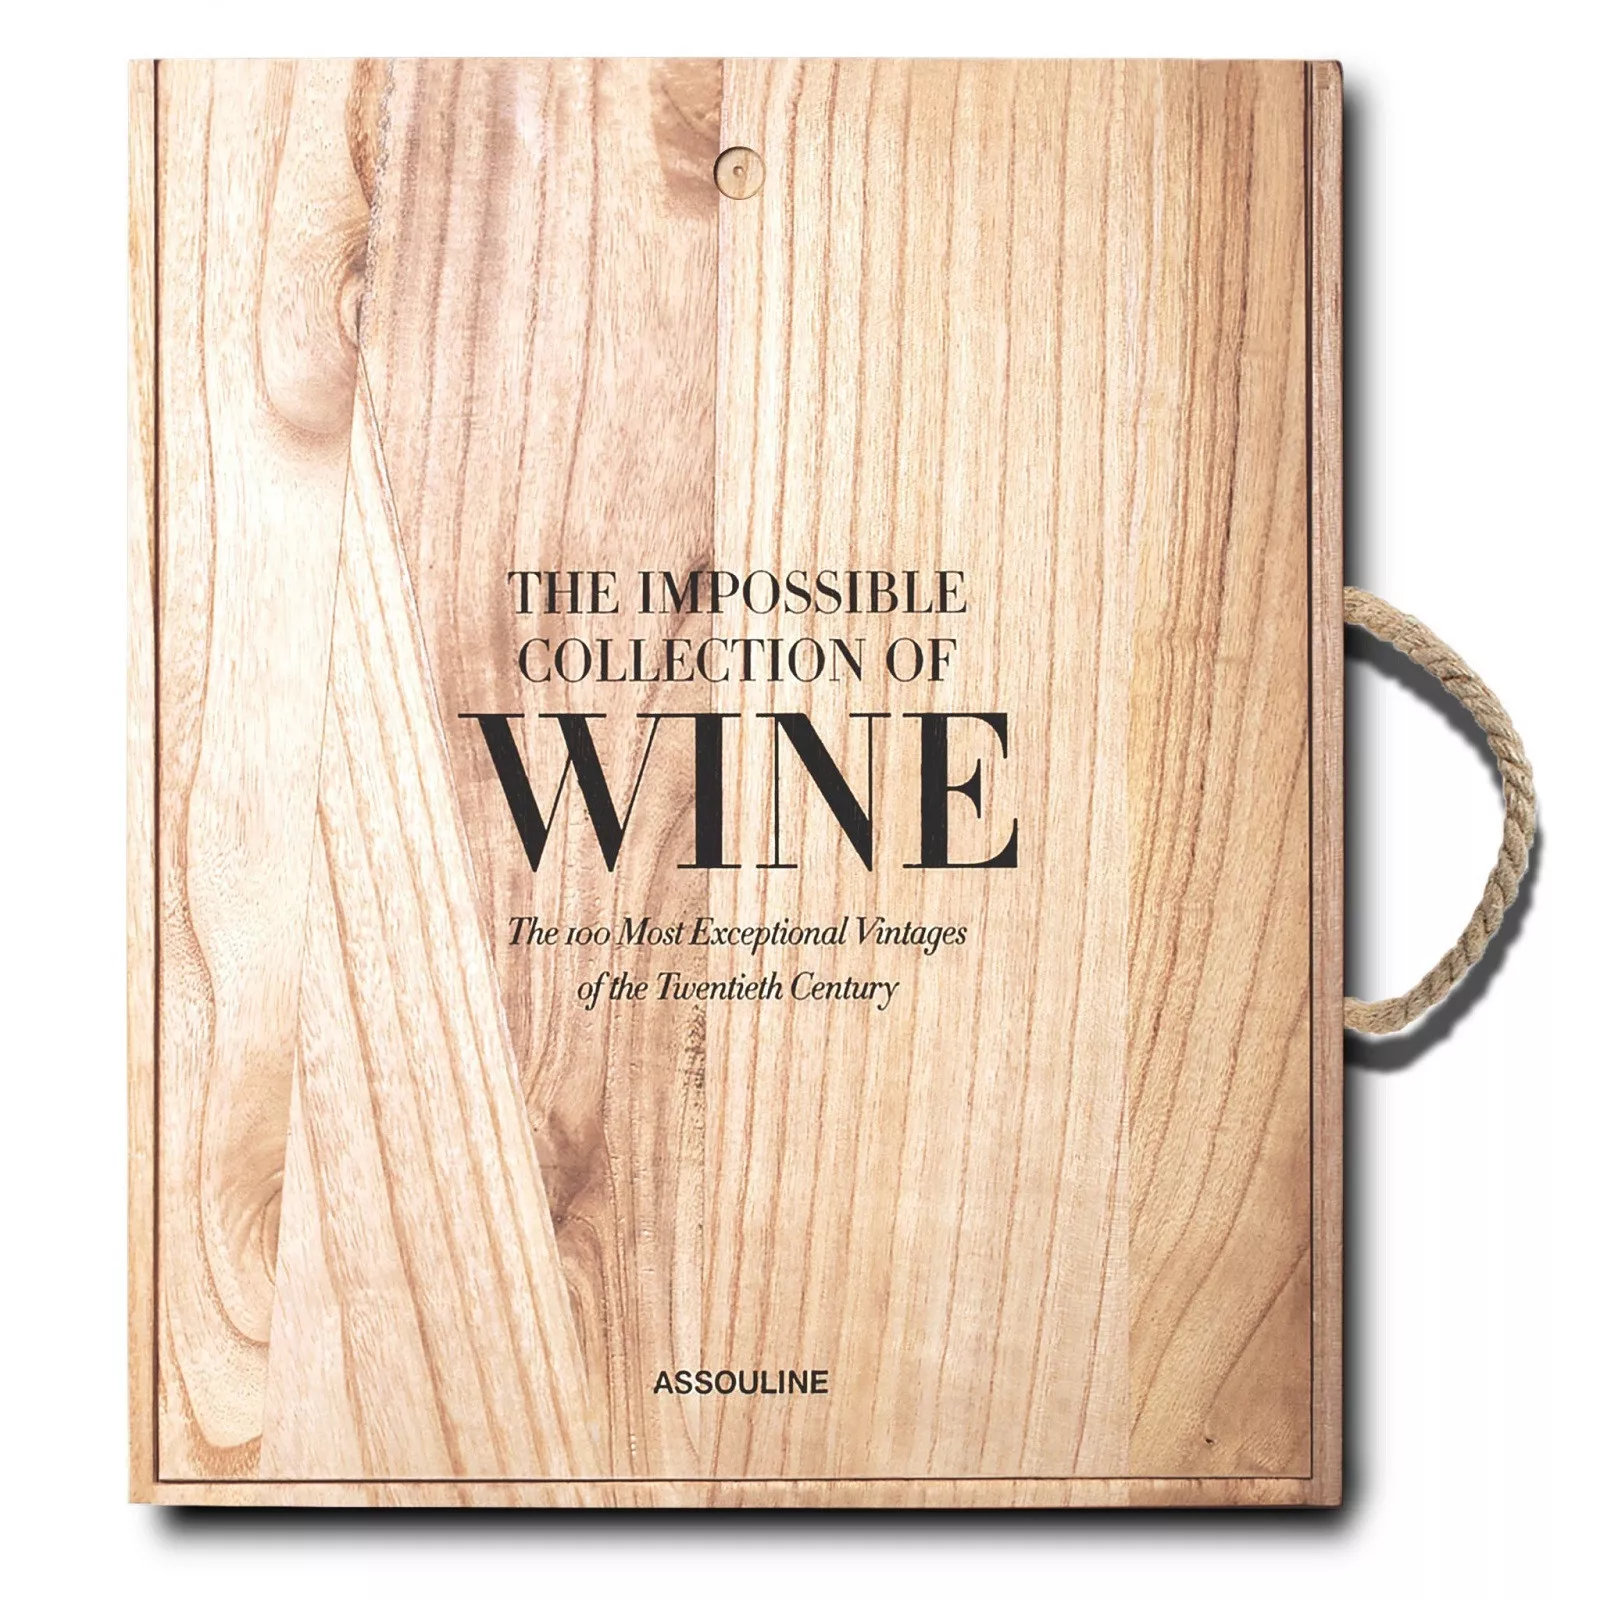 Книга "The Impossible Collection of Wine" Assouline Collection (9781614284710) - Фото nav 1